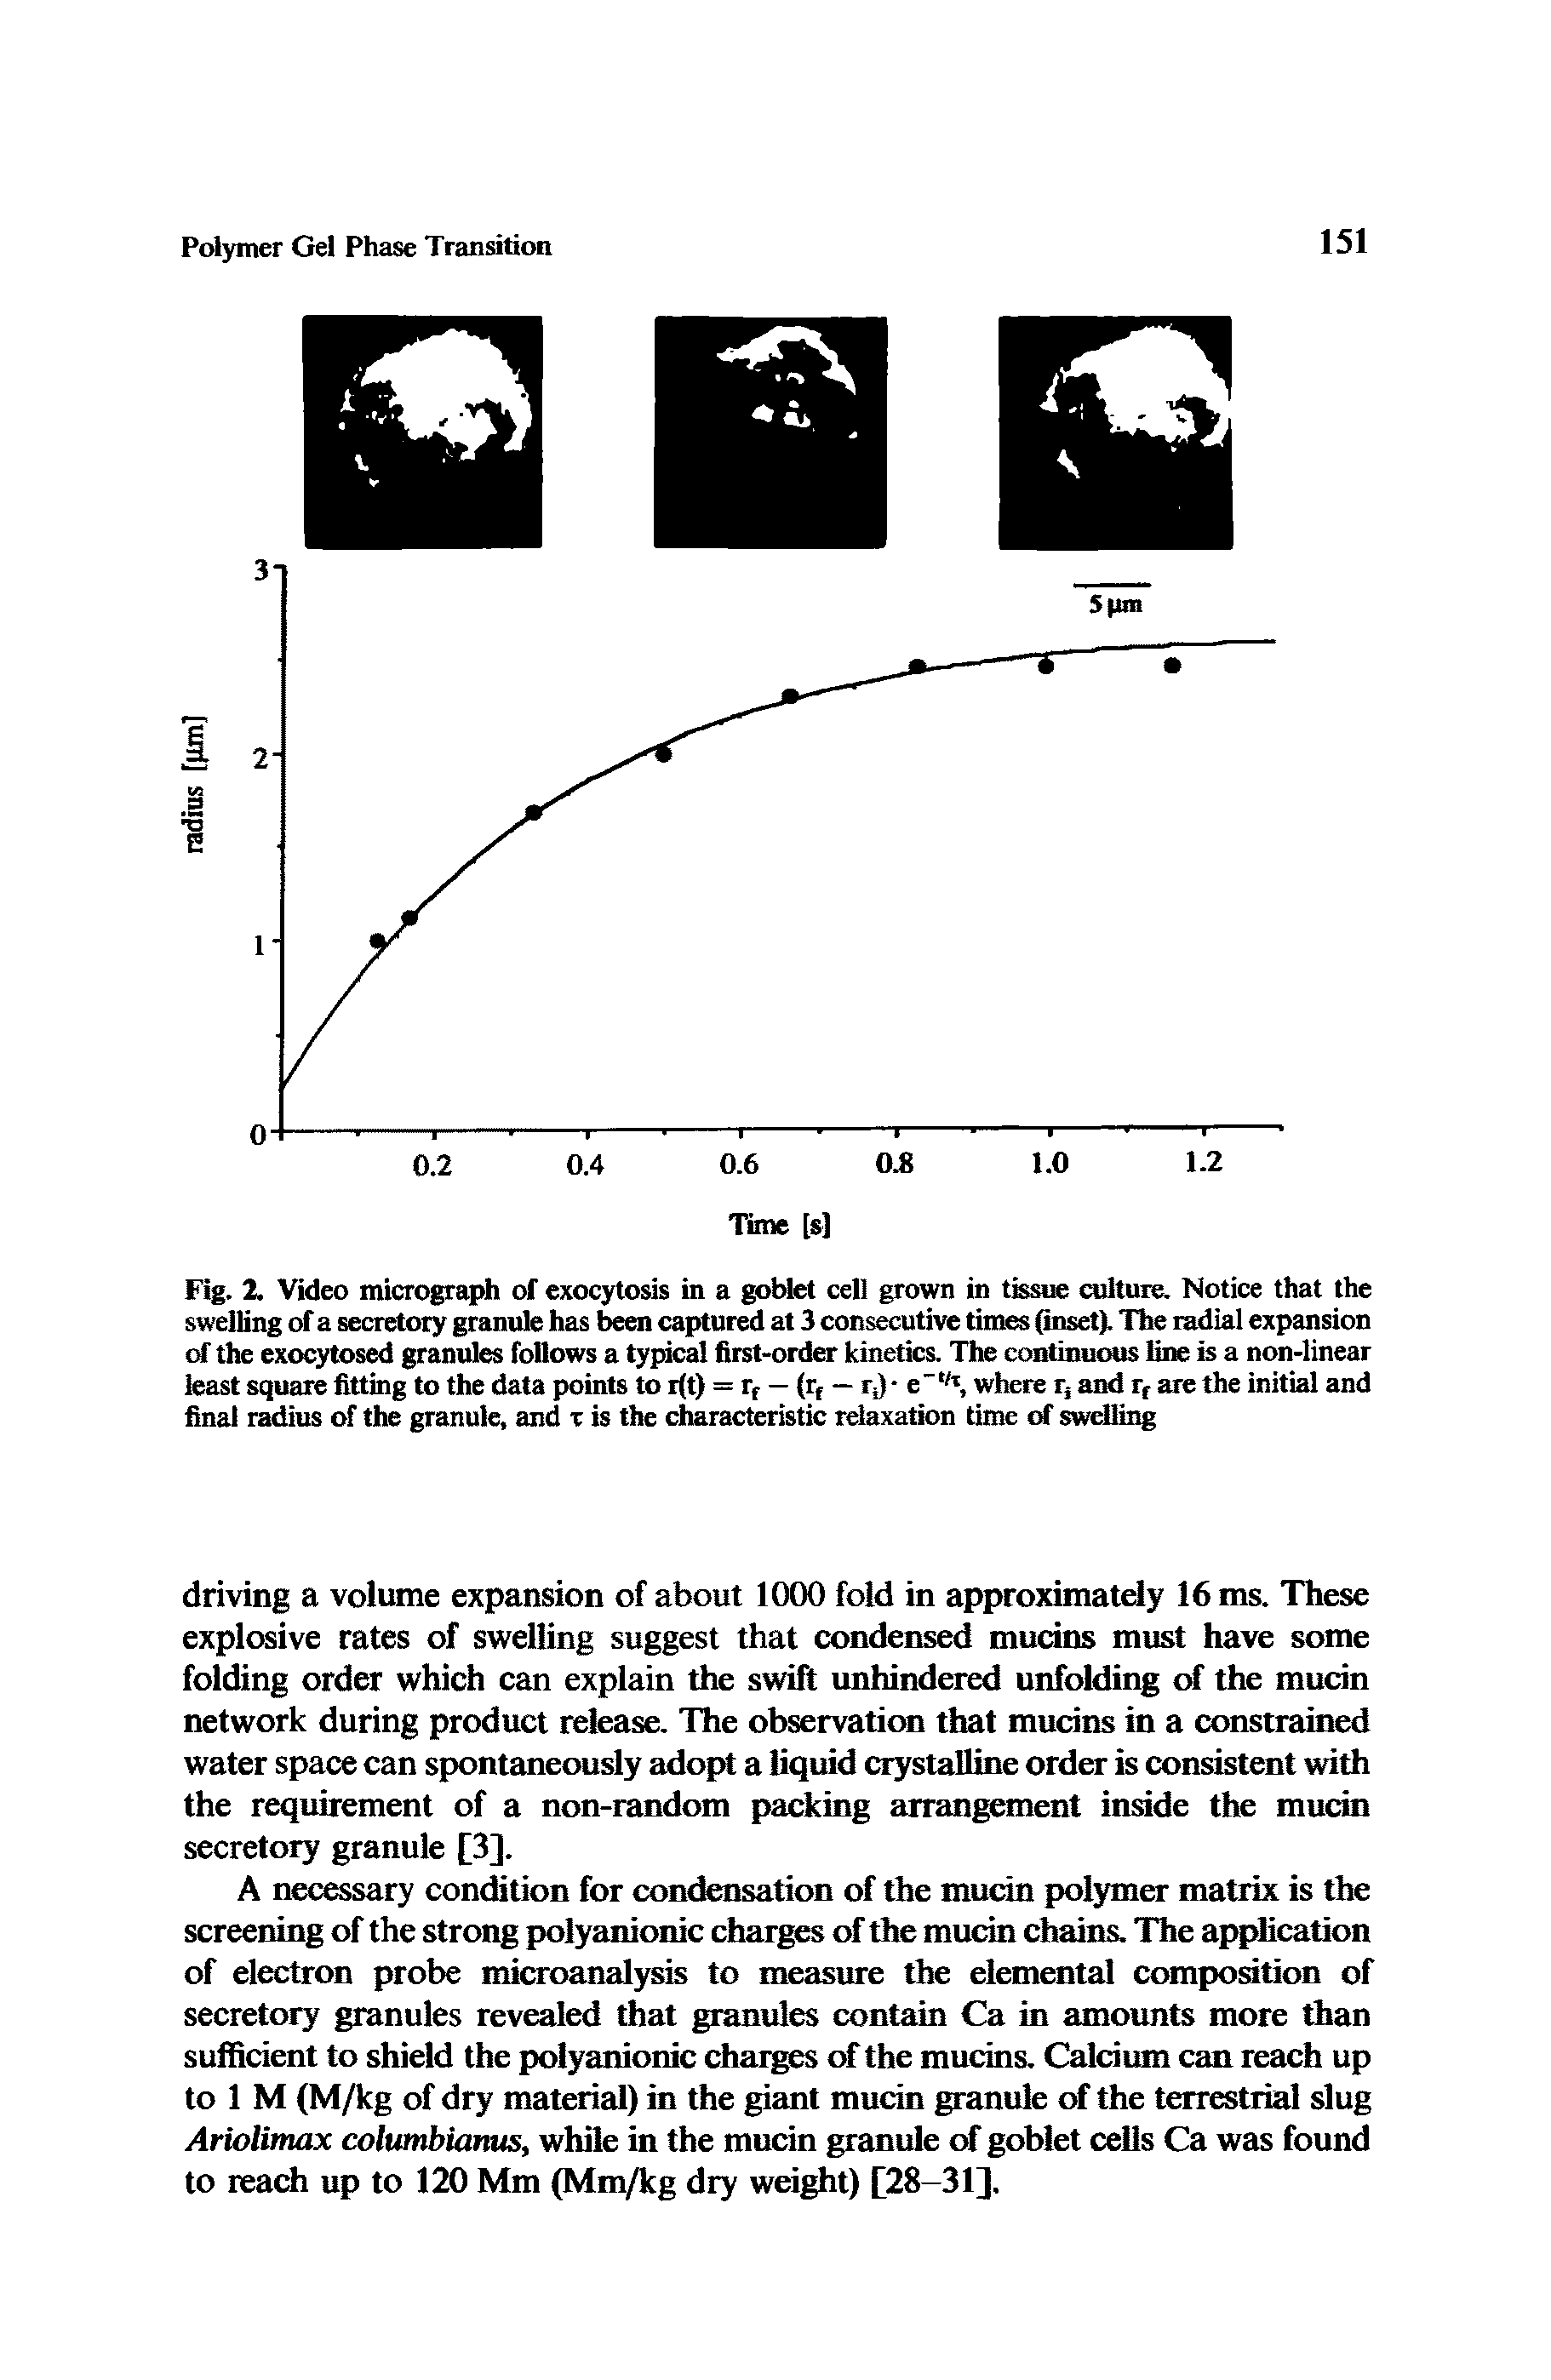 Fig. 2. Video micrograph of exocytosis in a goblet cell grown in tissue culture. Notice that the swelling of a secretory granule has been captured at 3 consecutive times (inset). The radial expansion of the exocytosed granules follows a typical first-order kinetics. The continuous line is a non-linear least square fitting to the data points to r(t) = rf — (rf — rj e " /T, where r, and rr are the initial and final radius of the granule, and t is the characteristic relaxation time of swelling...